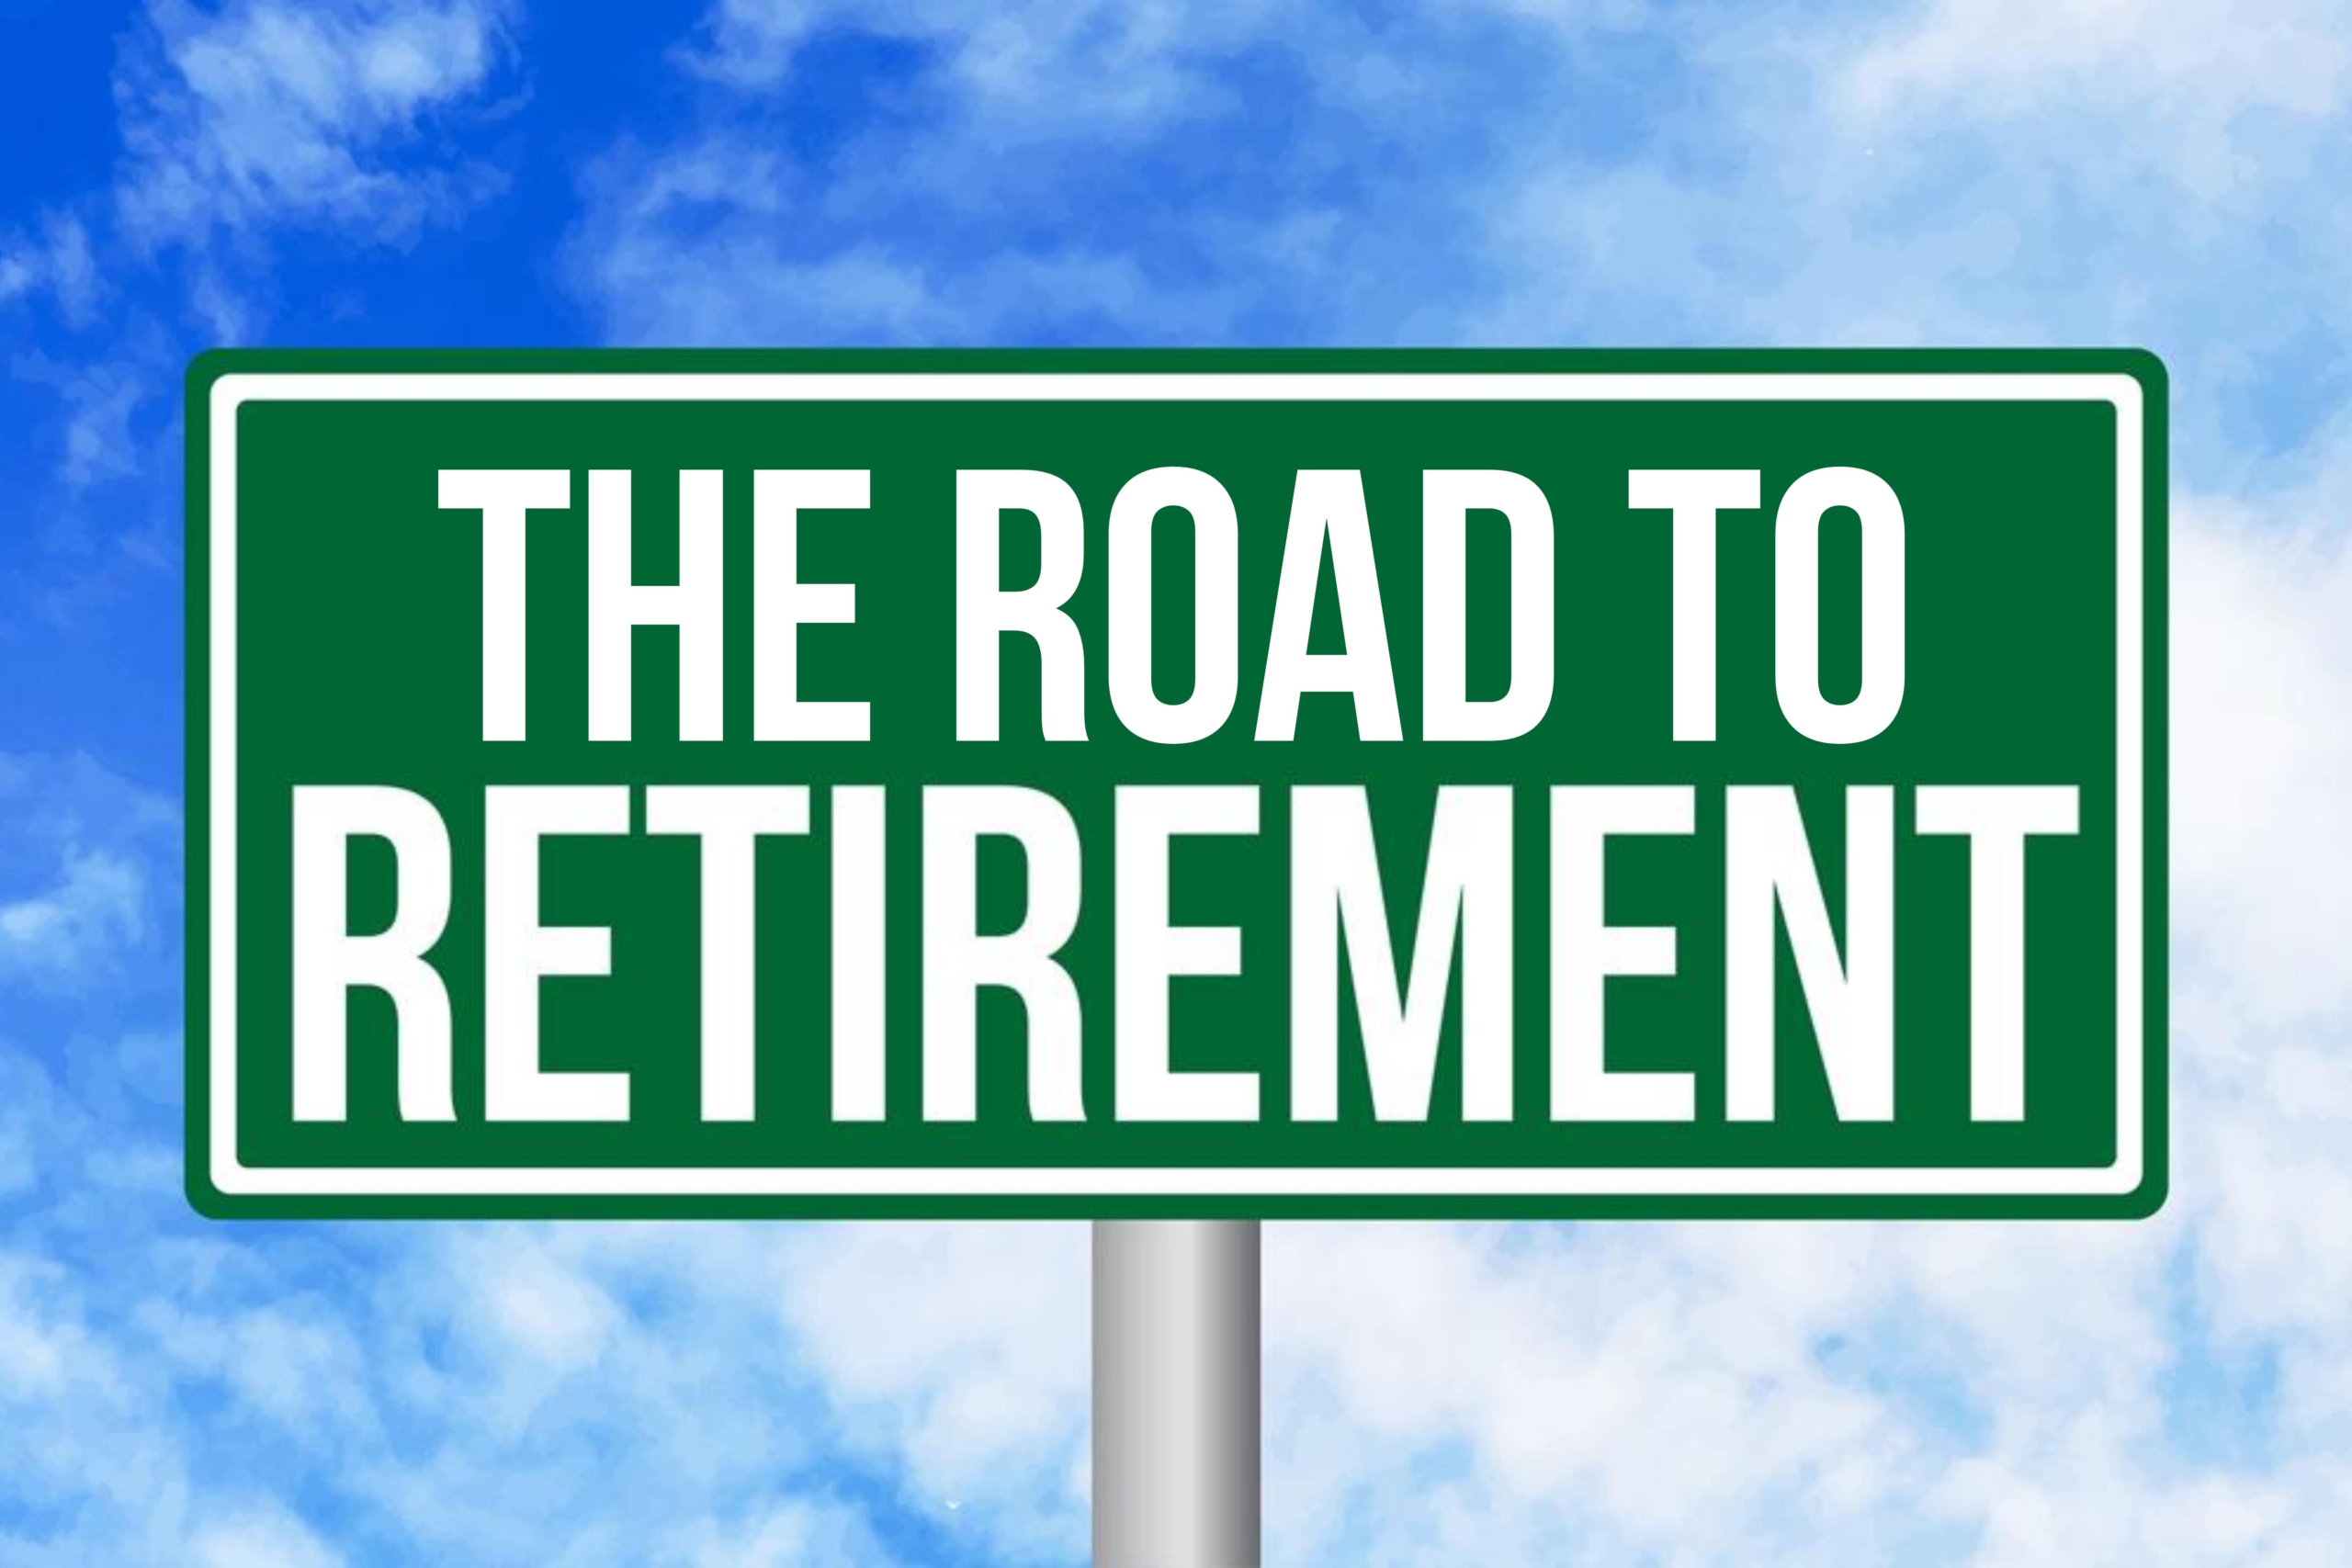 The Road to Retirement